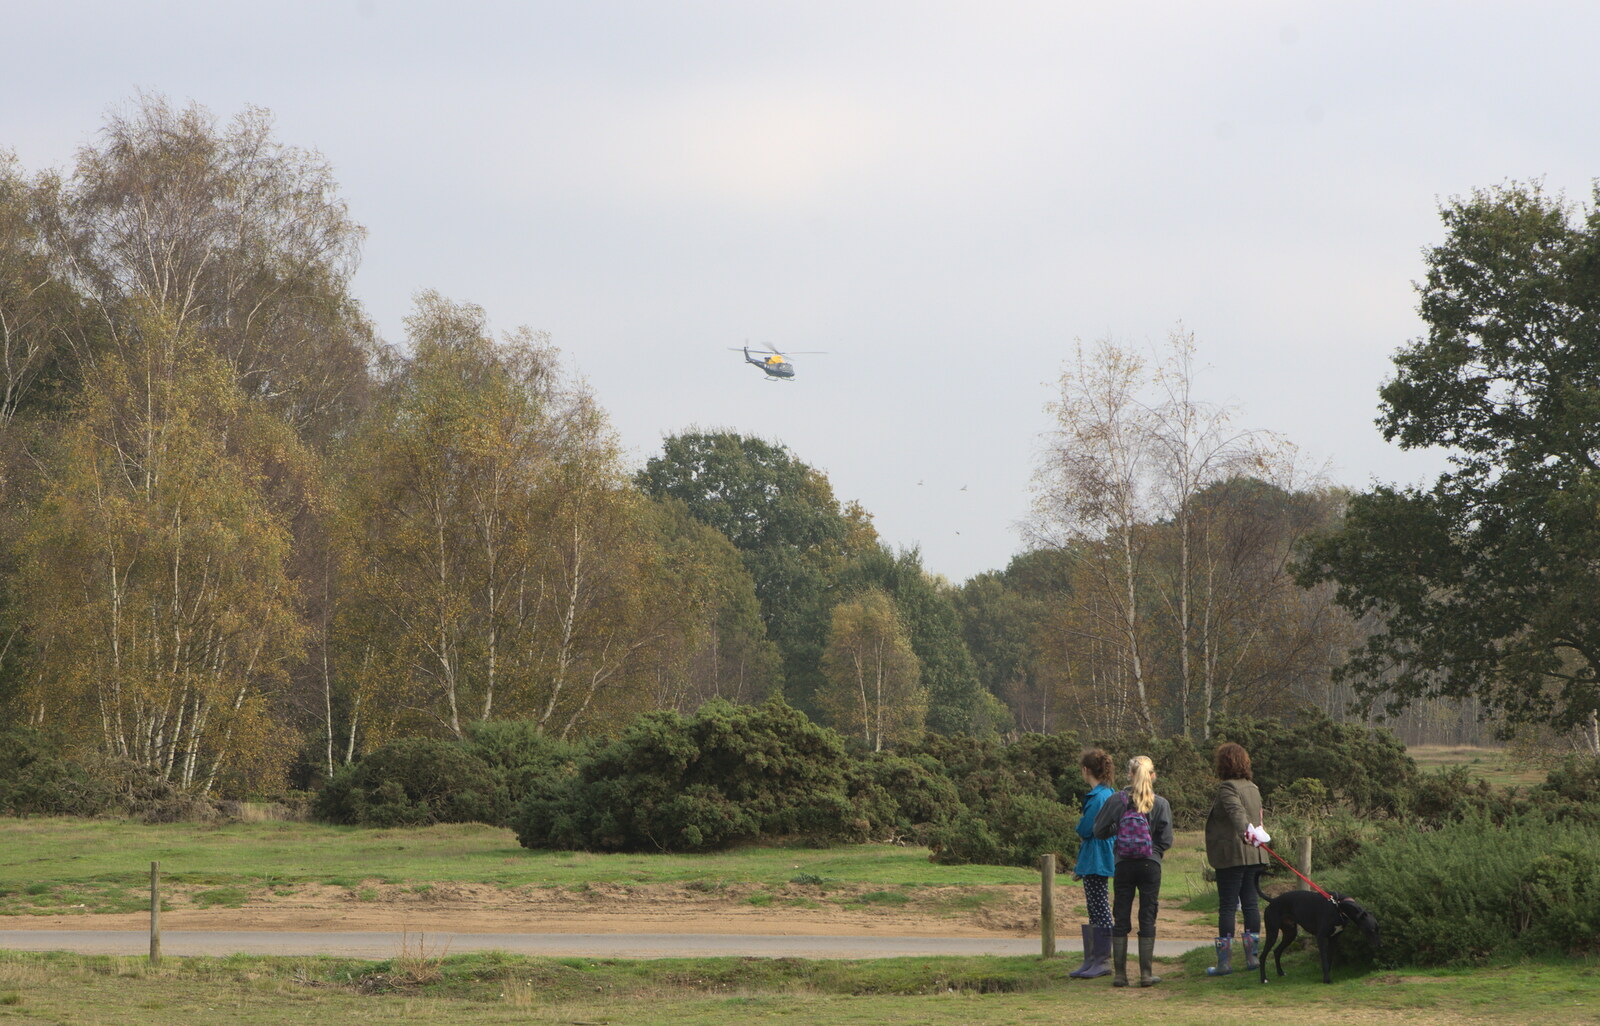 The air ambulance flies over Wortham Ling from A Walk on Wortham Ling, Diss, Norfolk - 30th October 2014